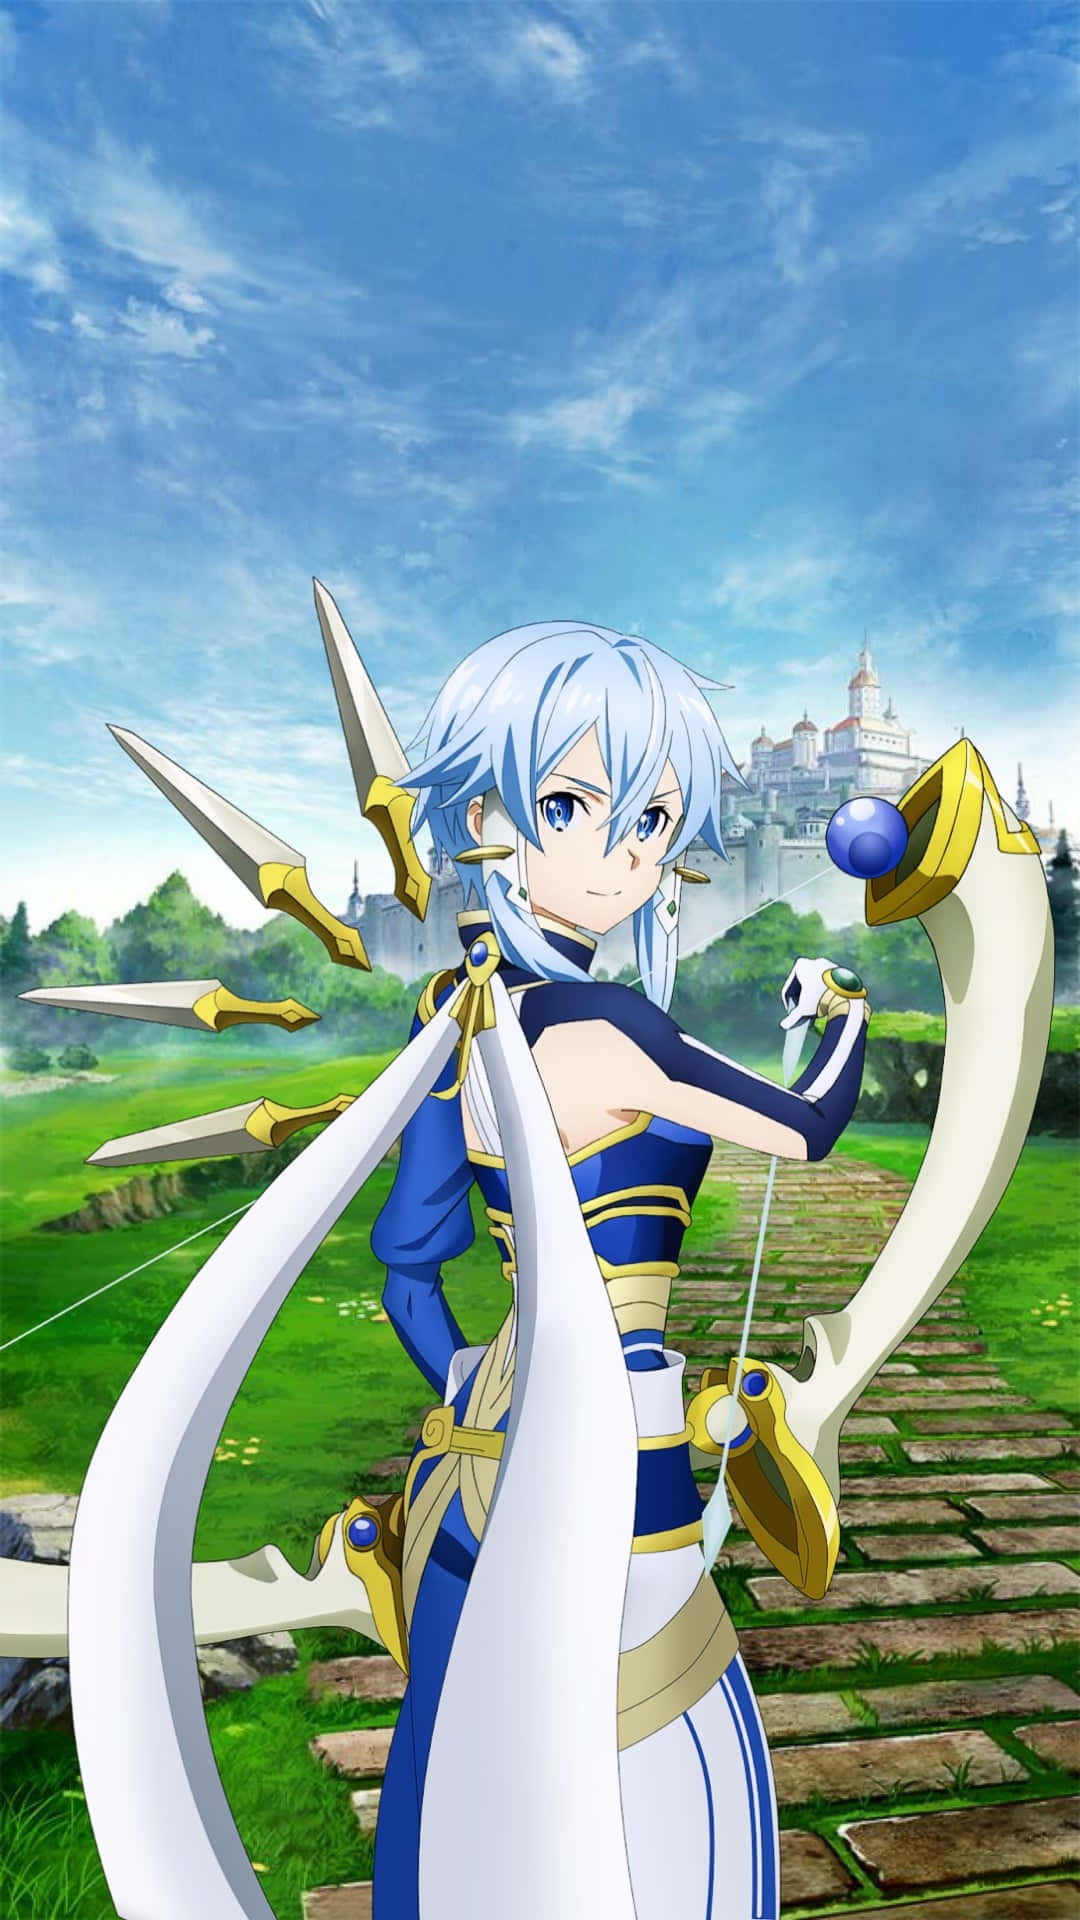 “Ready for Battle: Sinon Armed and Ready” Wallpaper